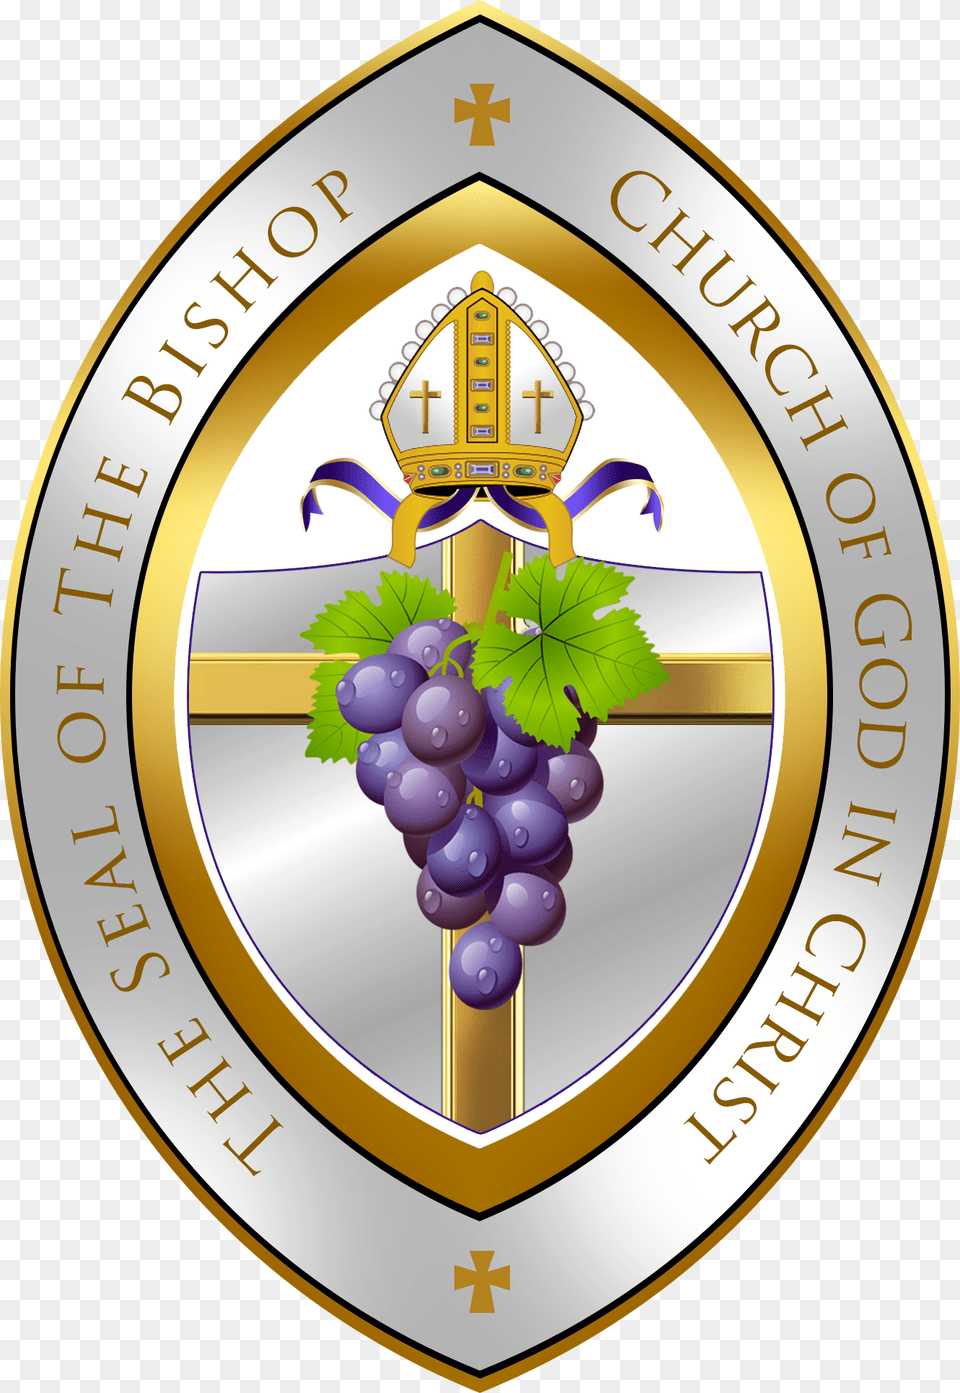 Cogic Seal Seedless Fruit, Food, Grapes, Plant, Produce Png Image